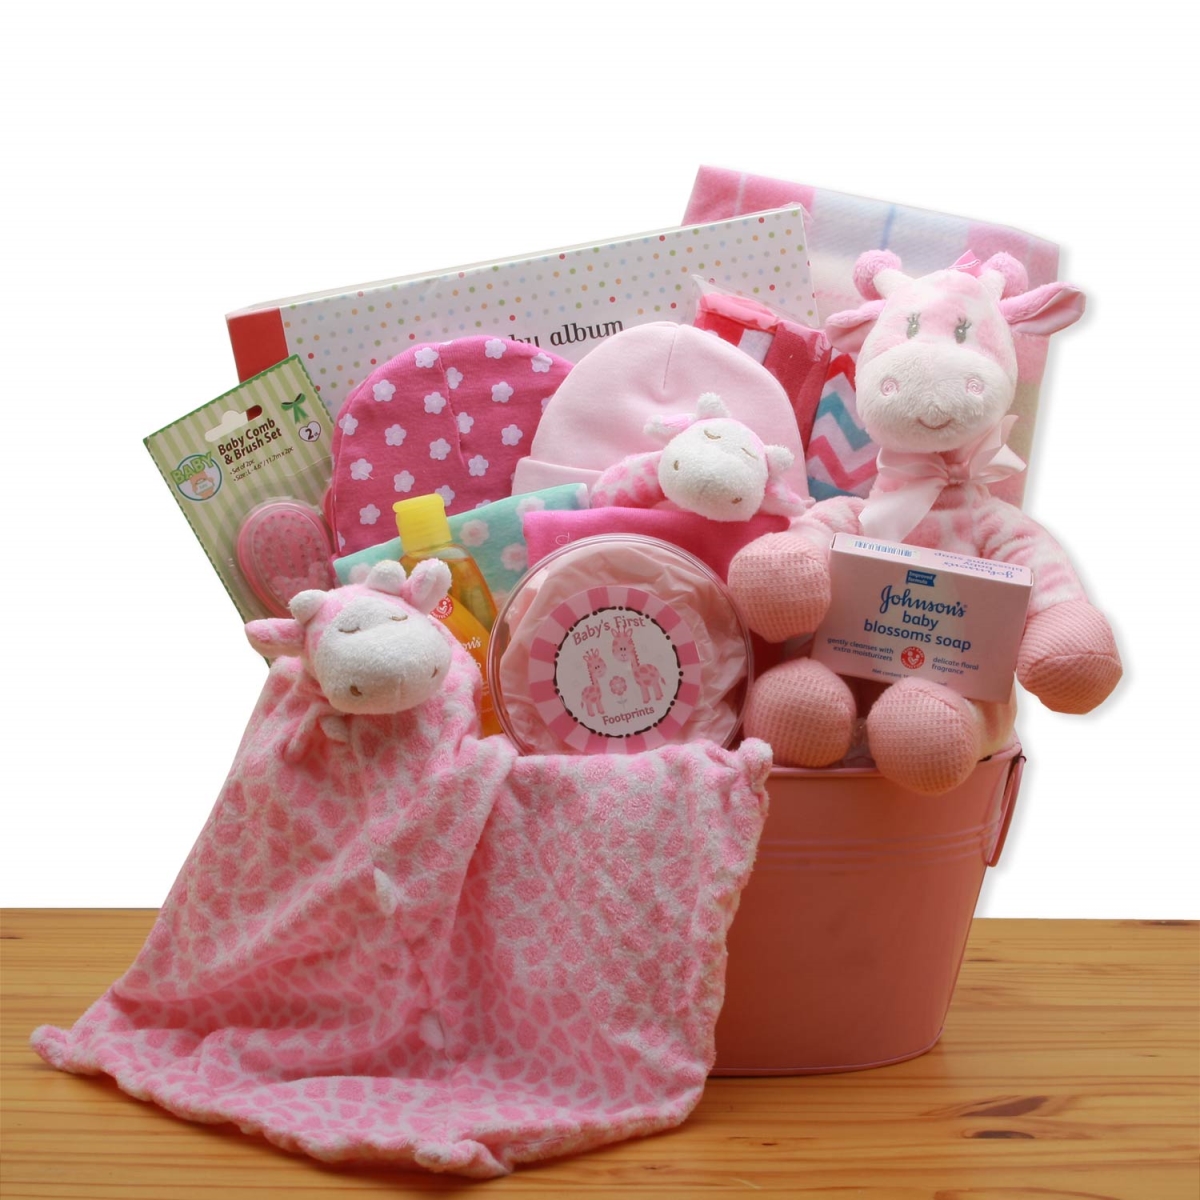 890852-p Comfy & Cozy Safari Friends New Baby Gift Basket - Pink